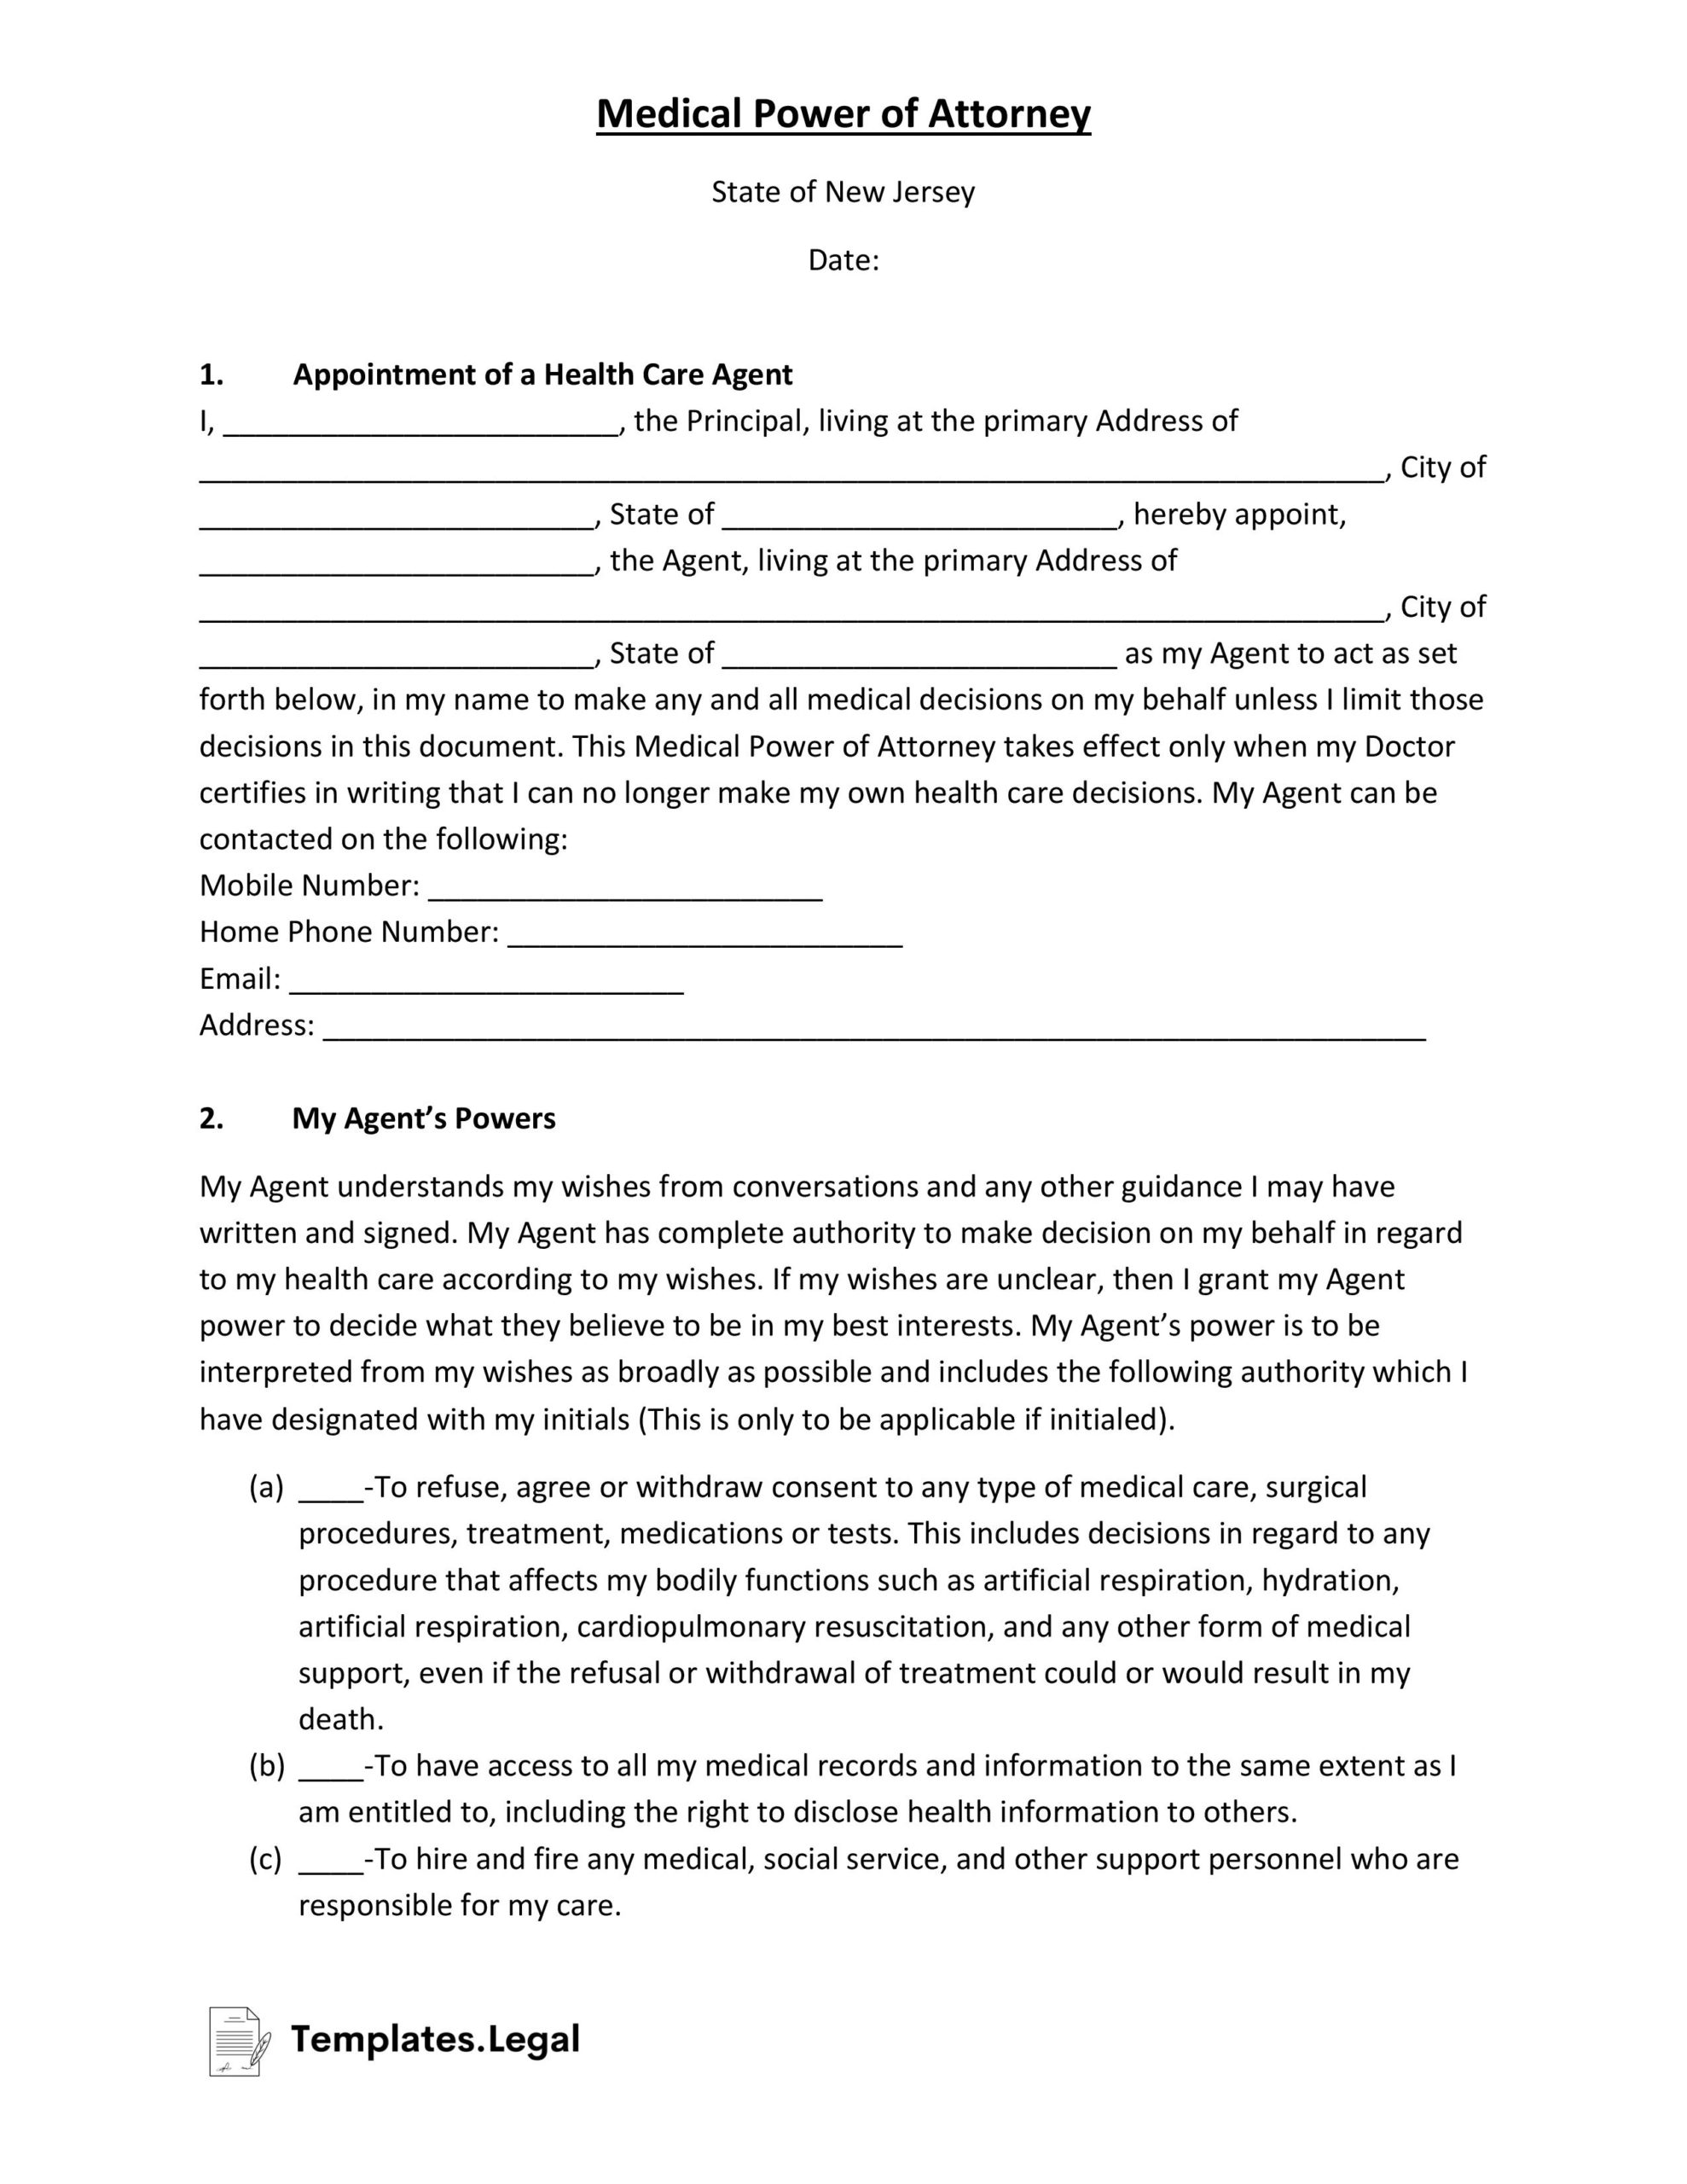 New Jersey Medical Power of Attorney- Templates.Legal